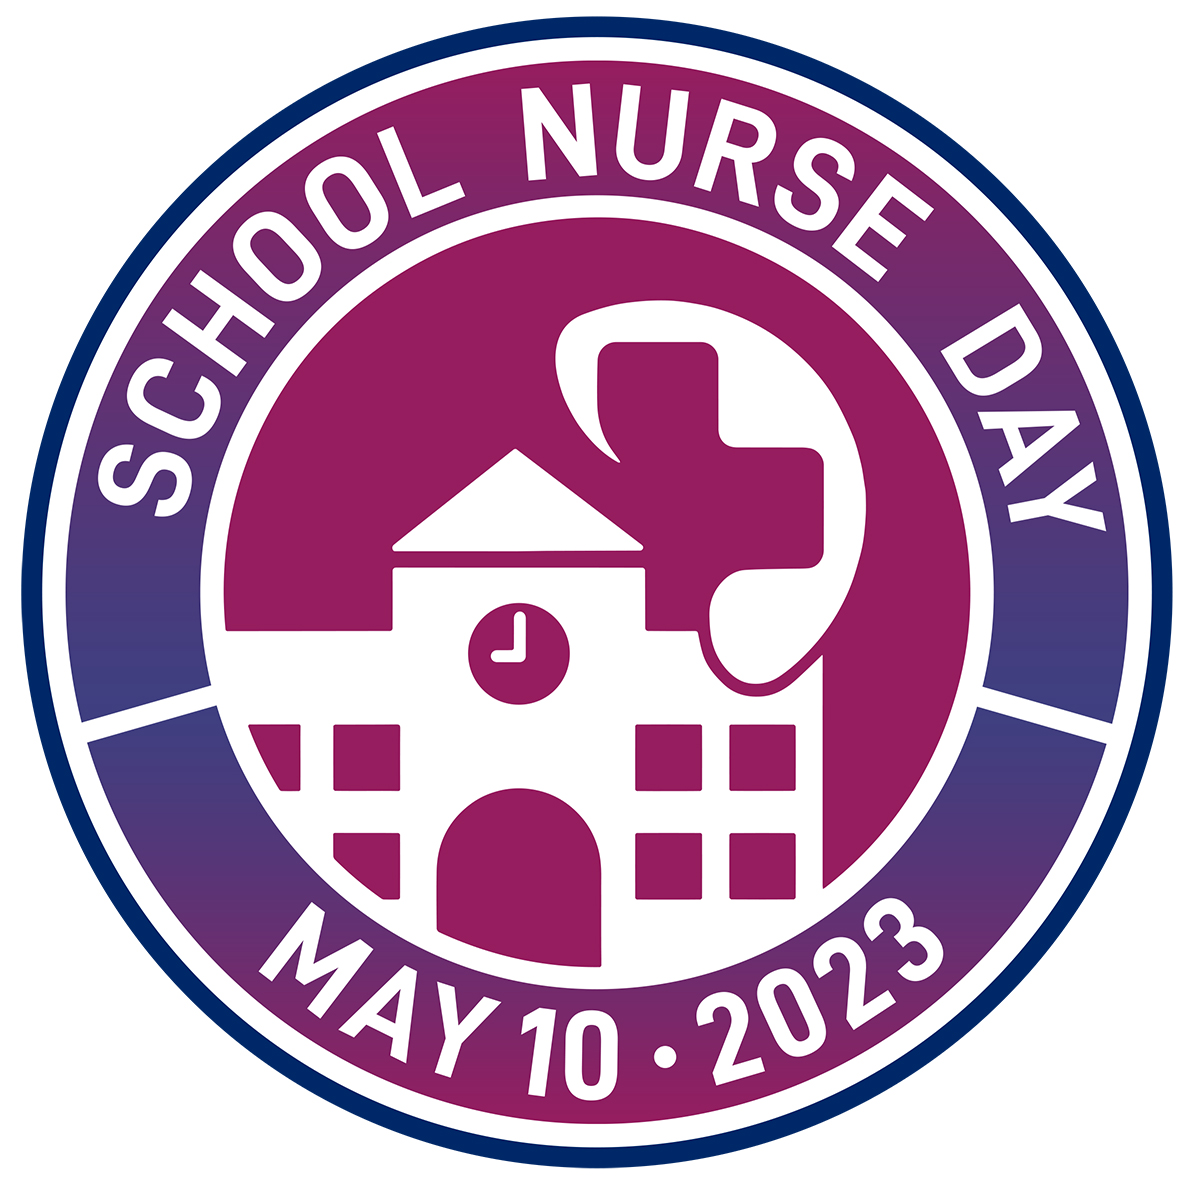 Thank you to the school nurses across Maryland who help keep kids safe and healthy and teach poison prevention in schools #SND2023 #NursesWeek2023